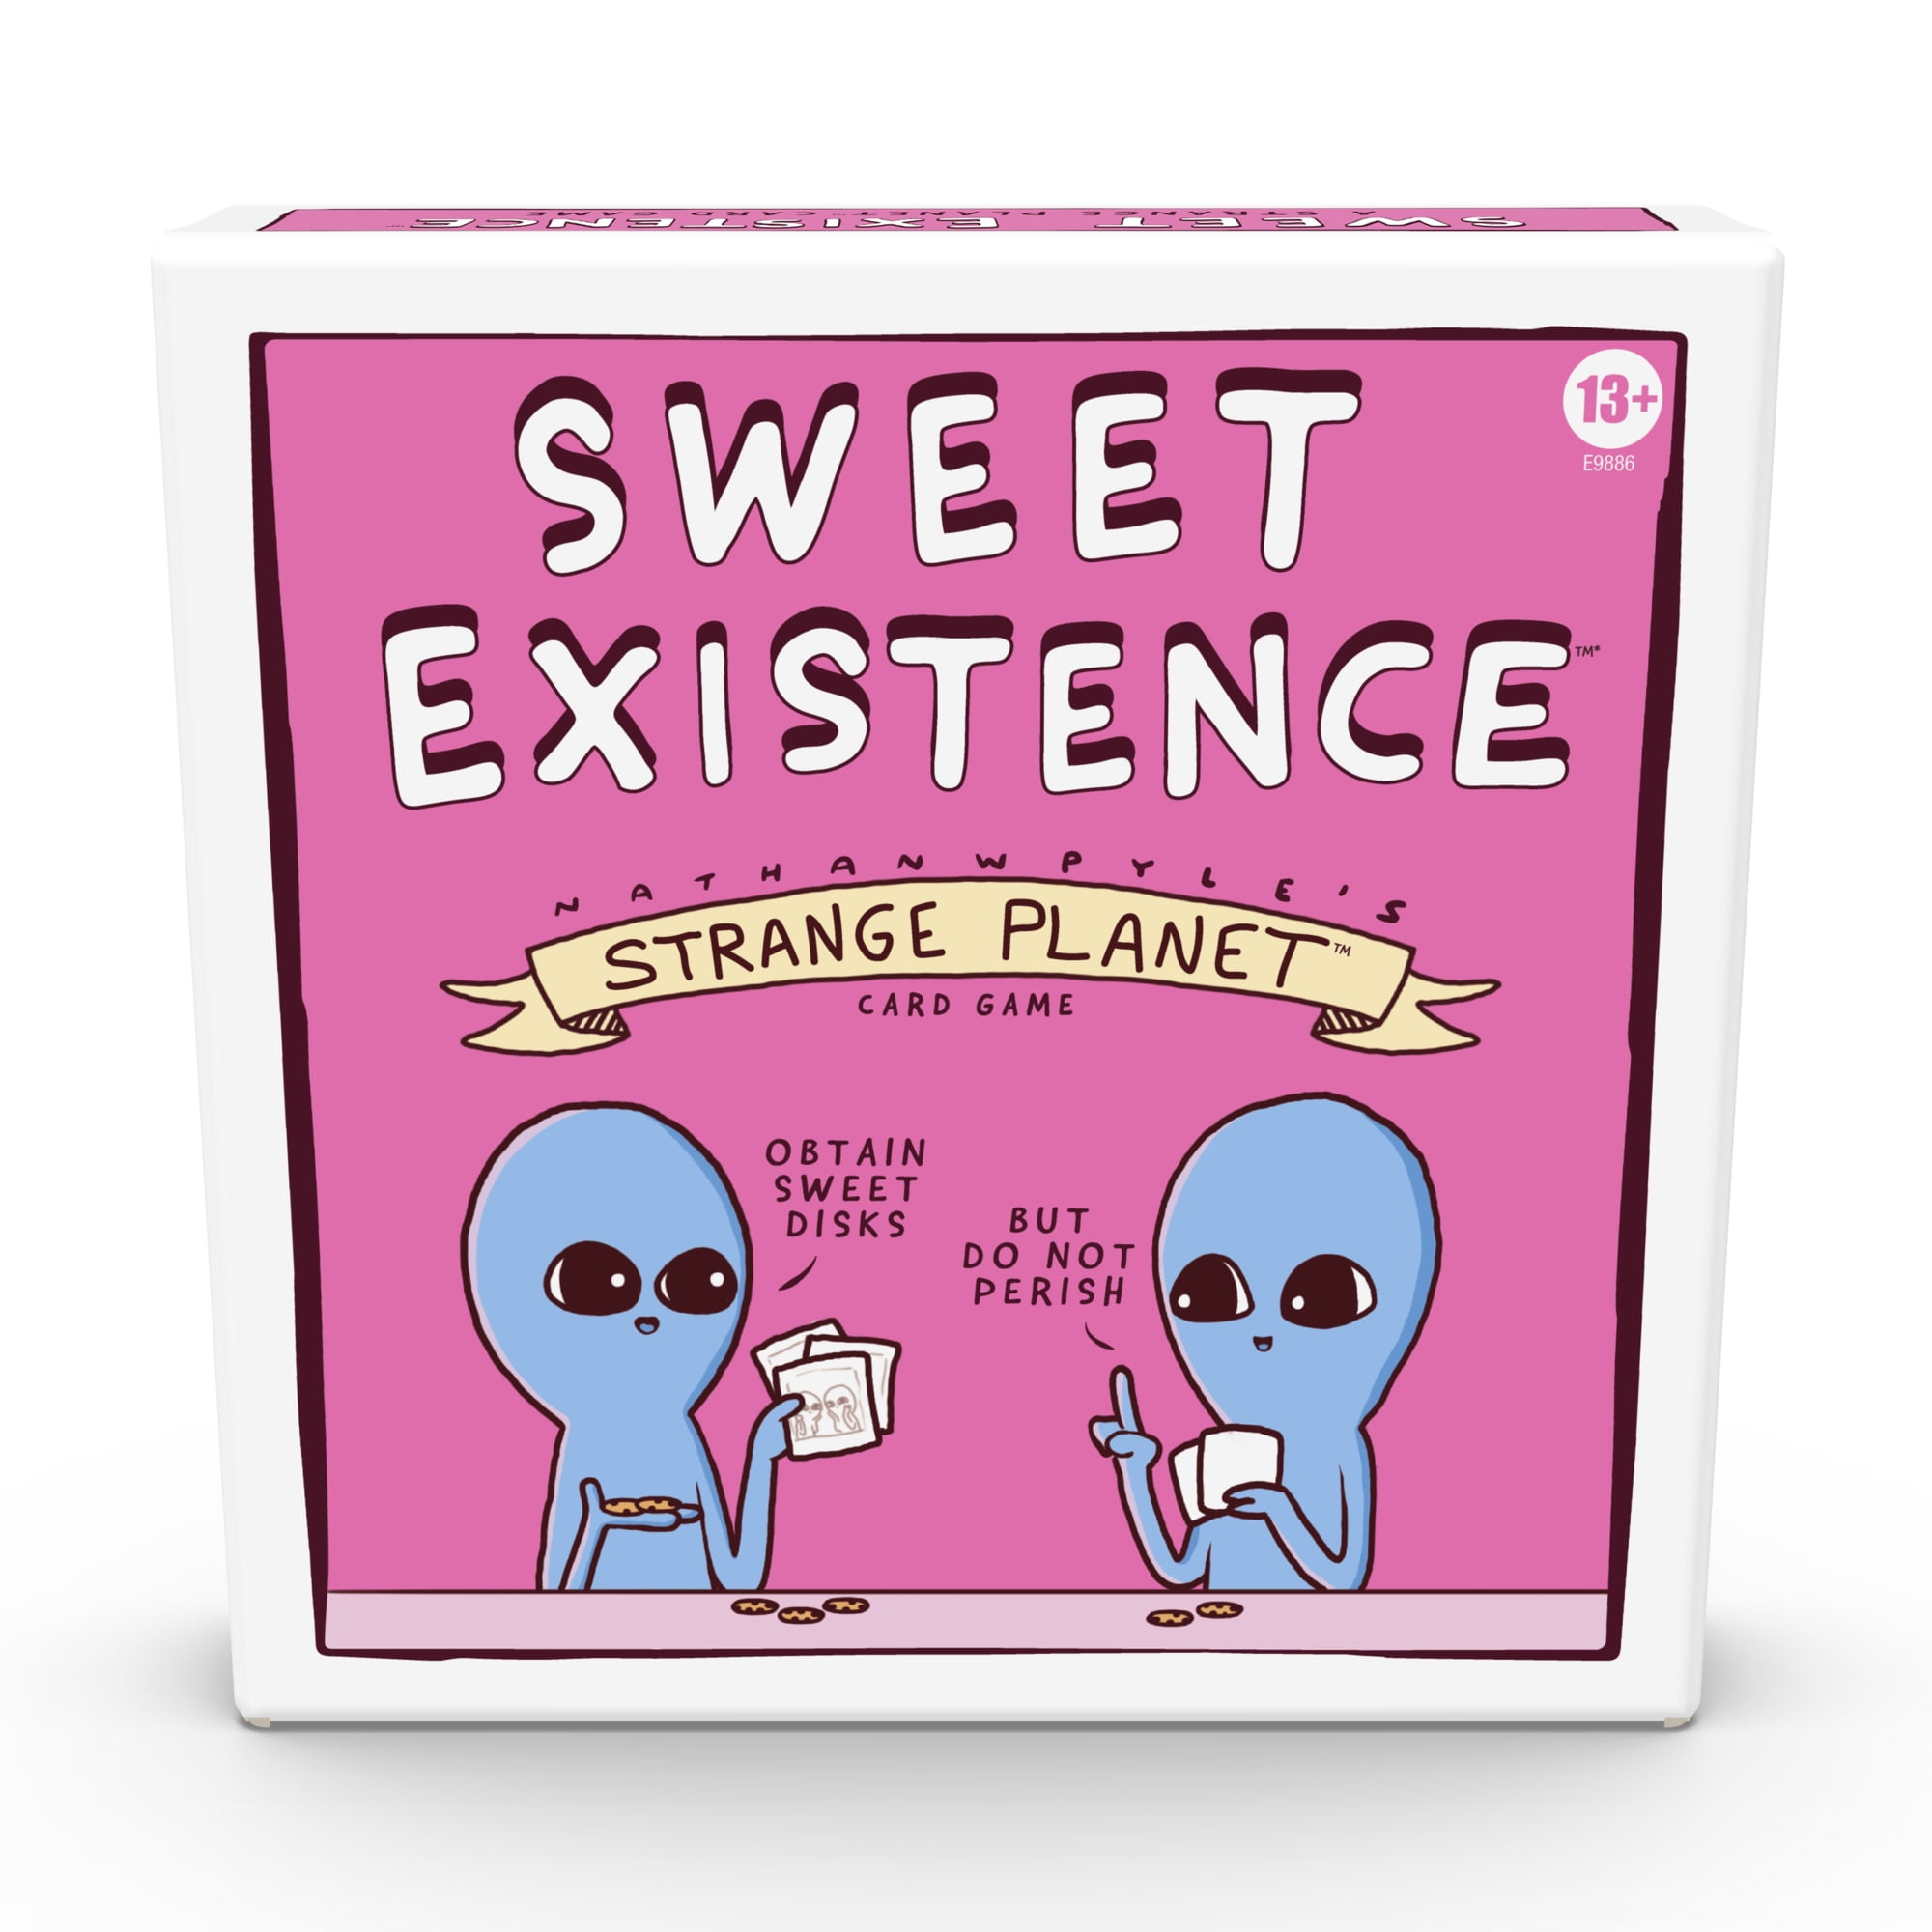 Sweet Existence A Strange Planet Card Game $4.75